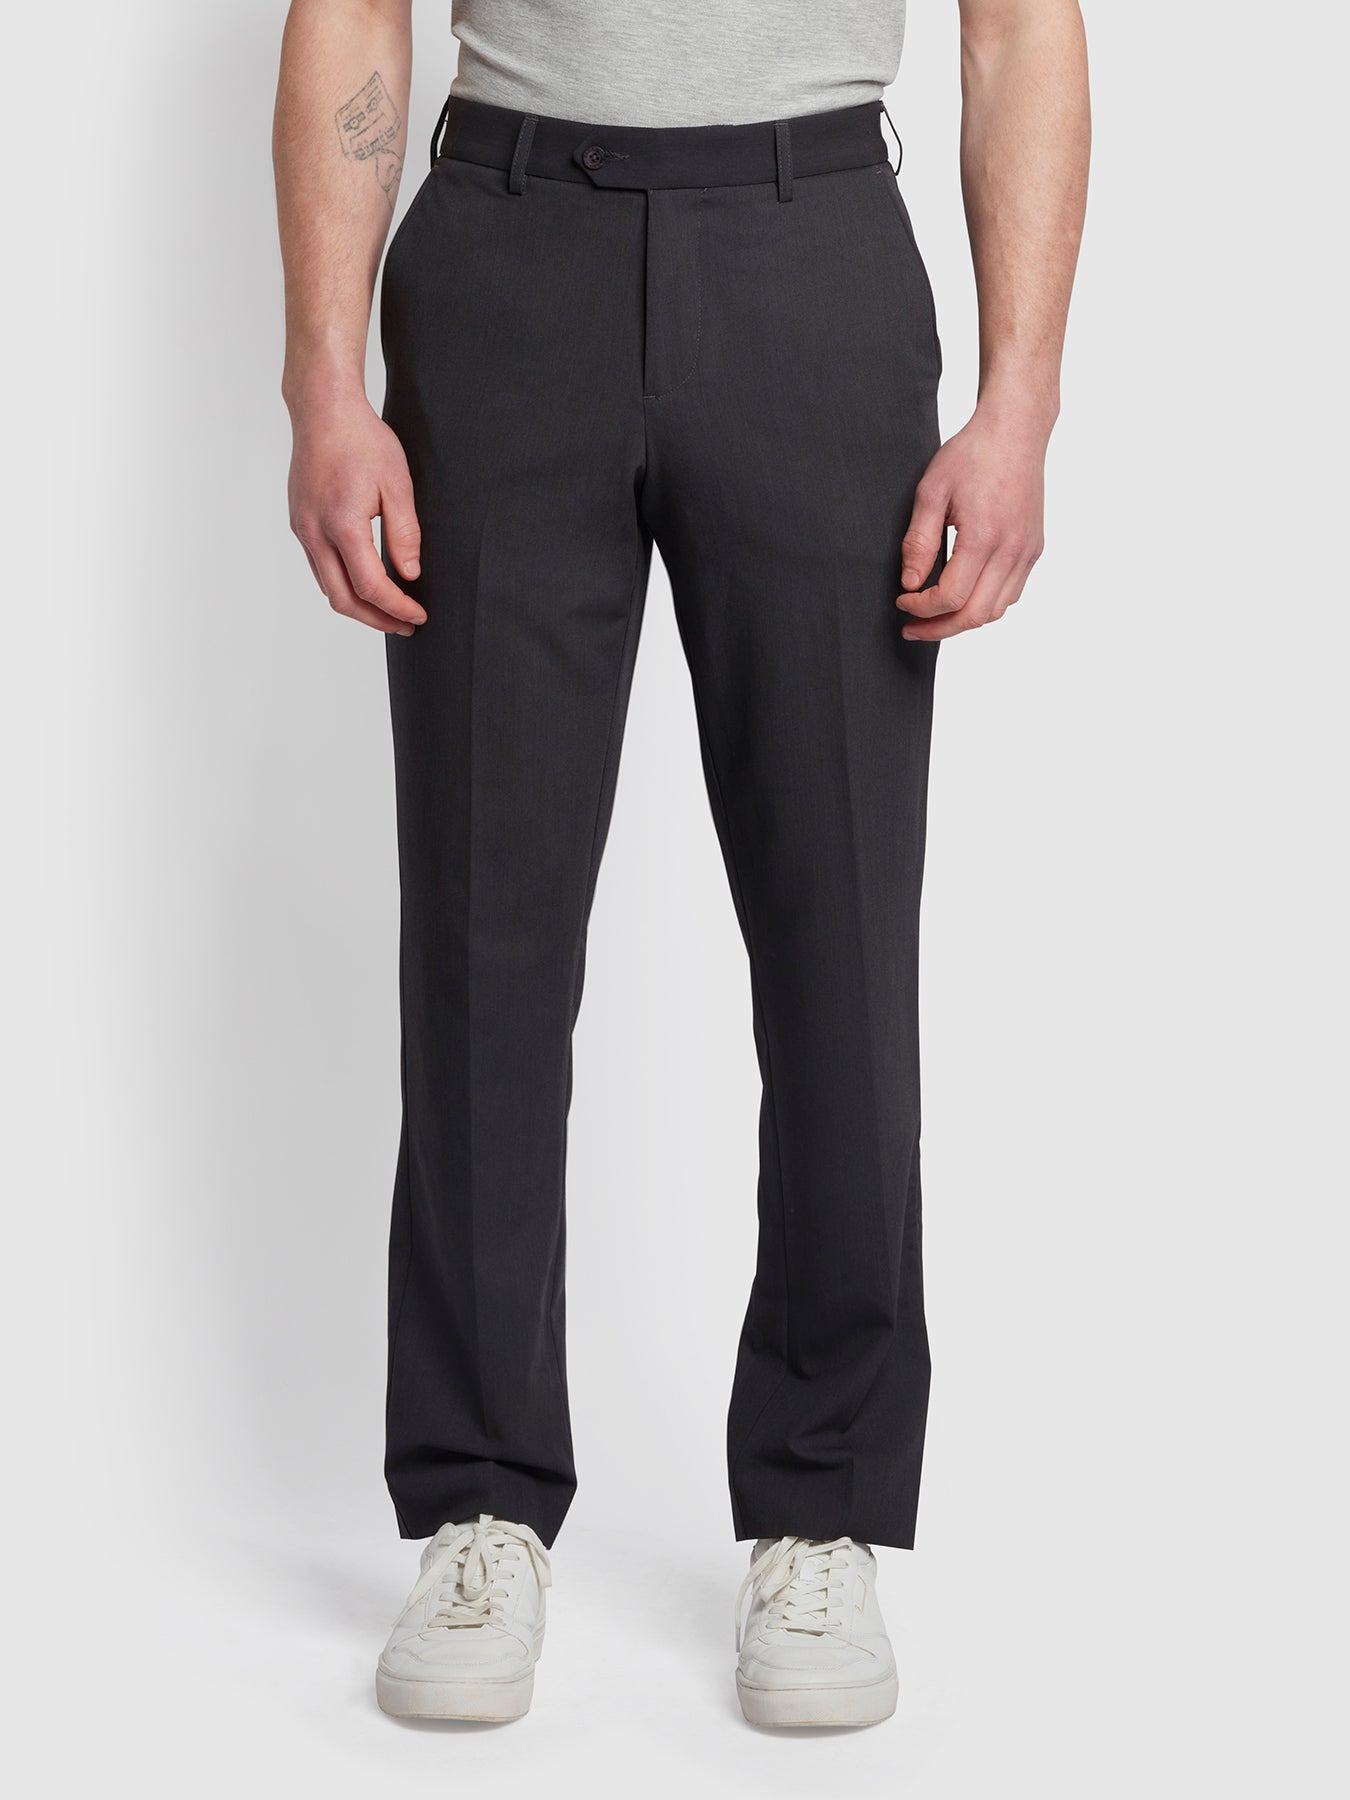 View Roachman 4 Way Stretch Trousers In Charcoal information